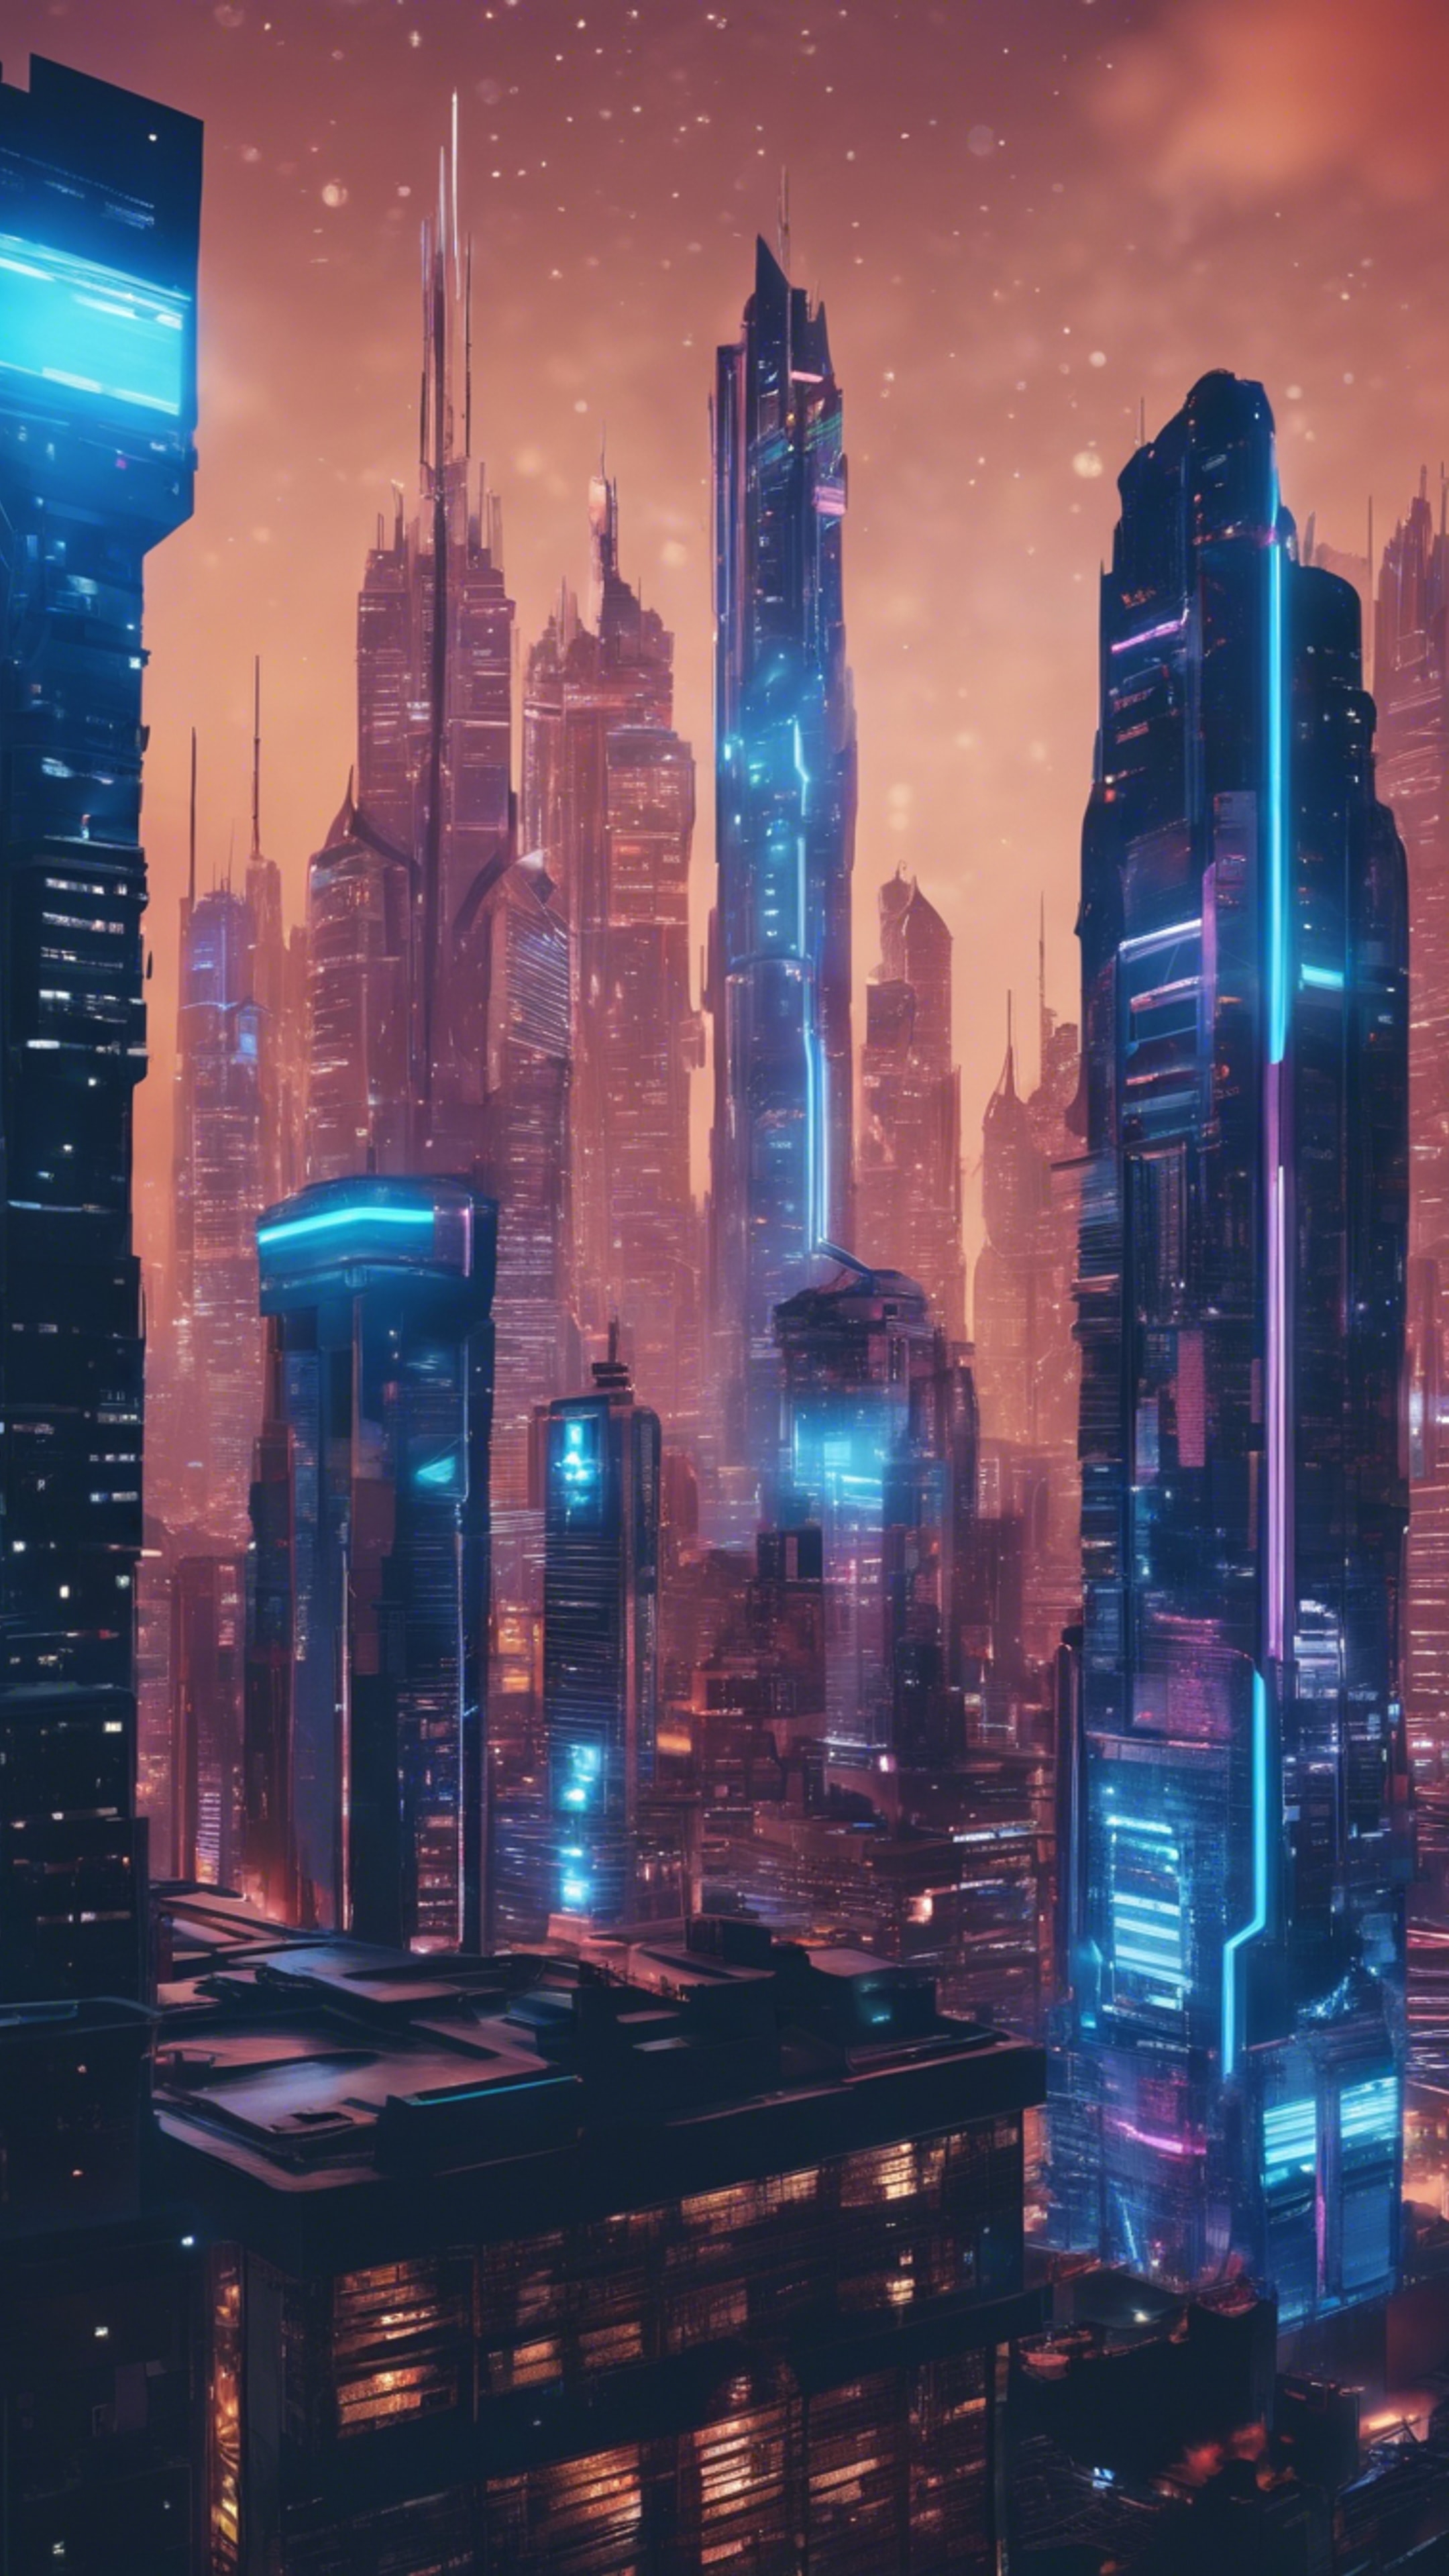 A futuristic city glowing with vibrant neon-blue lights and skyscrapers piercing the night sky. Tapet[2f3a3bdee3e14a4e9359]